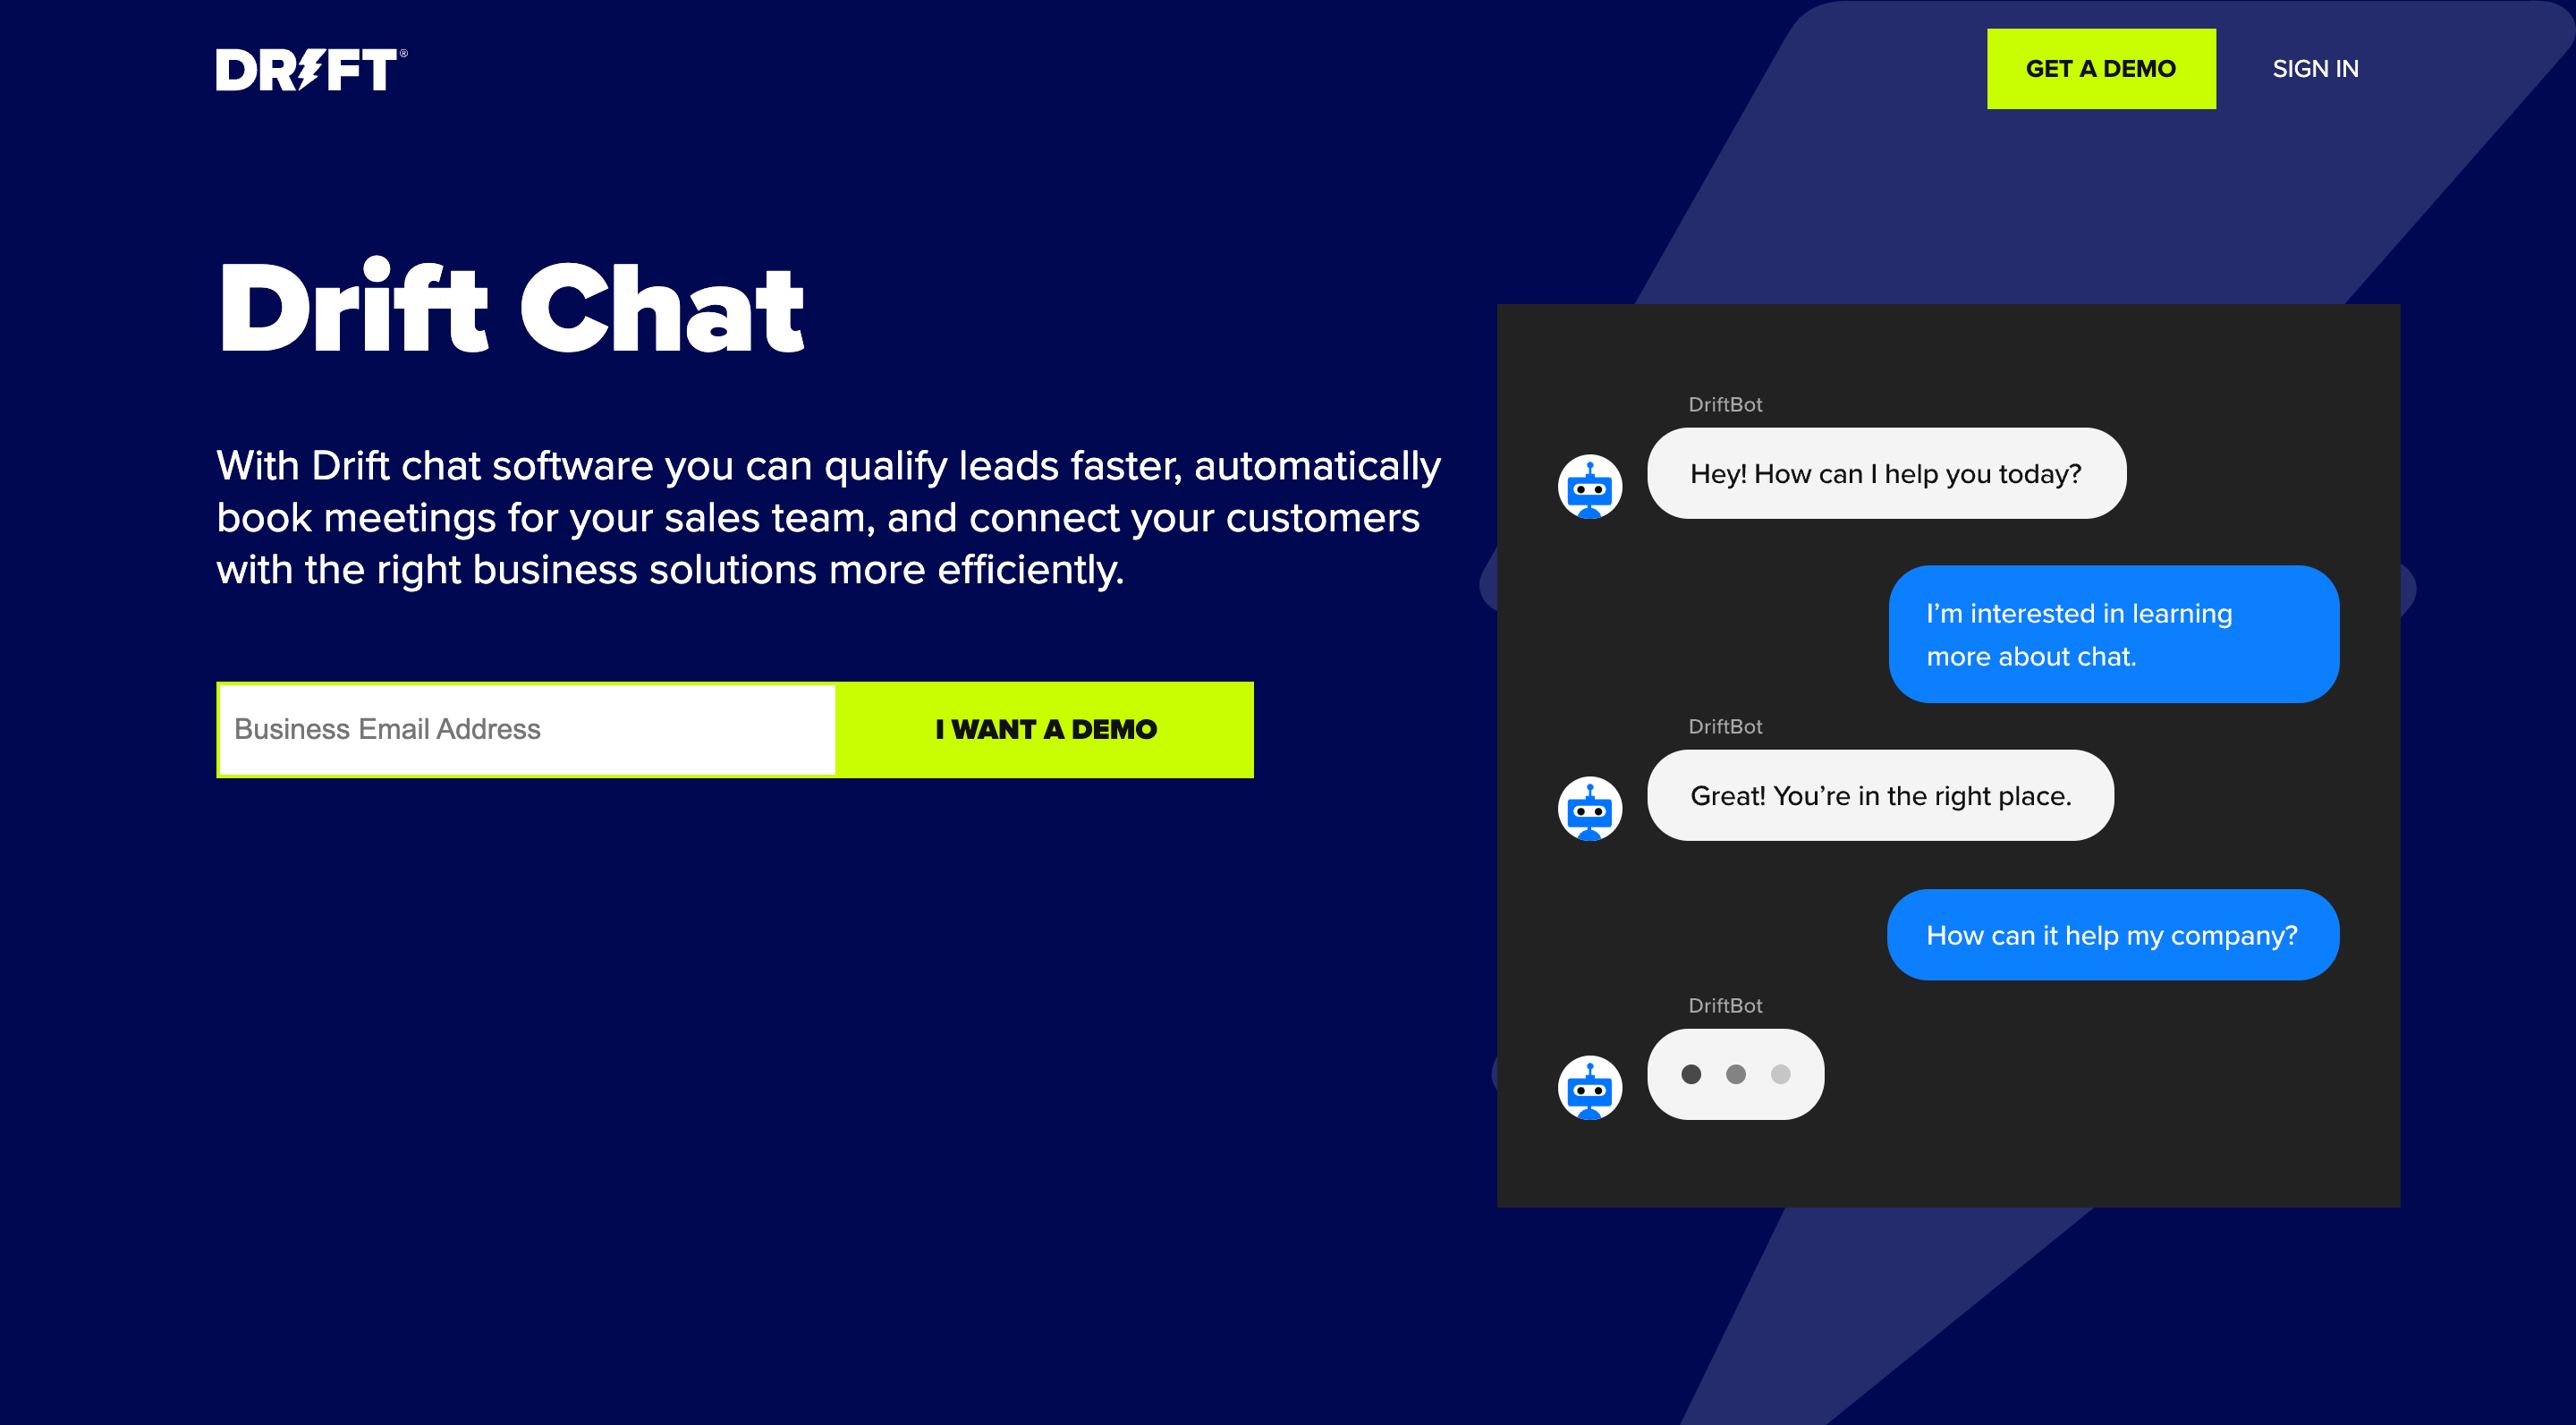 Drift squeeze landing page with dark blue background and bright green CTA